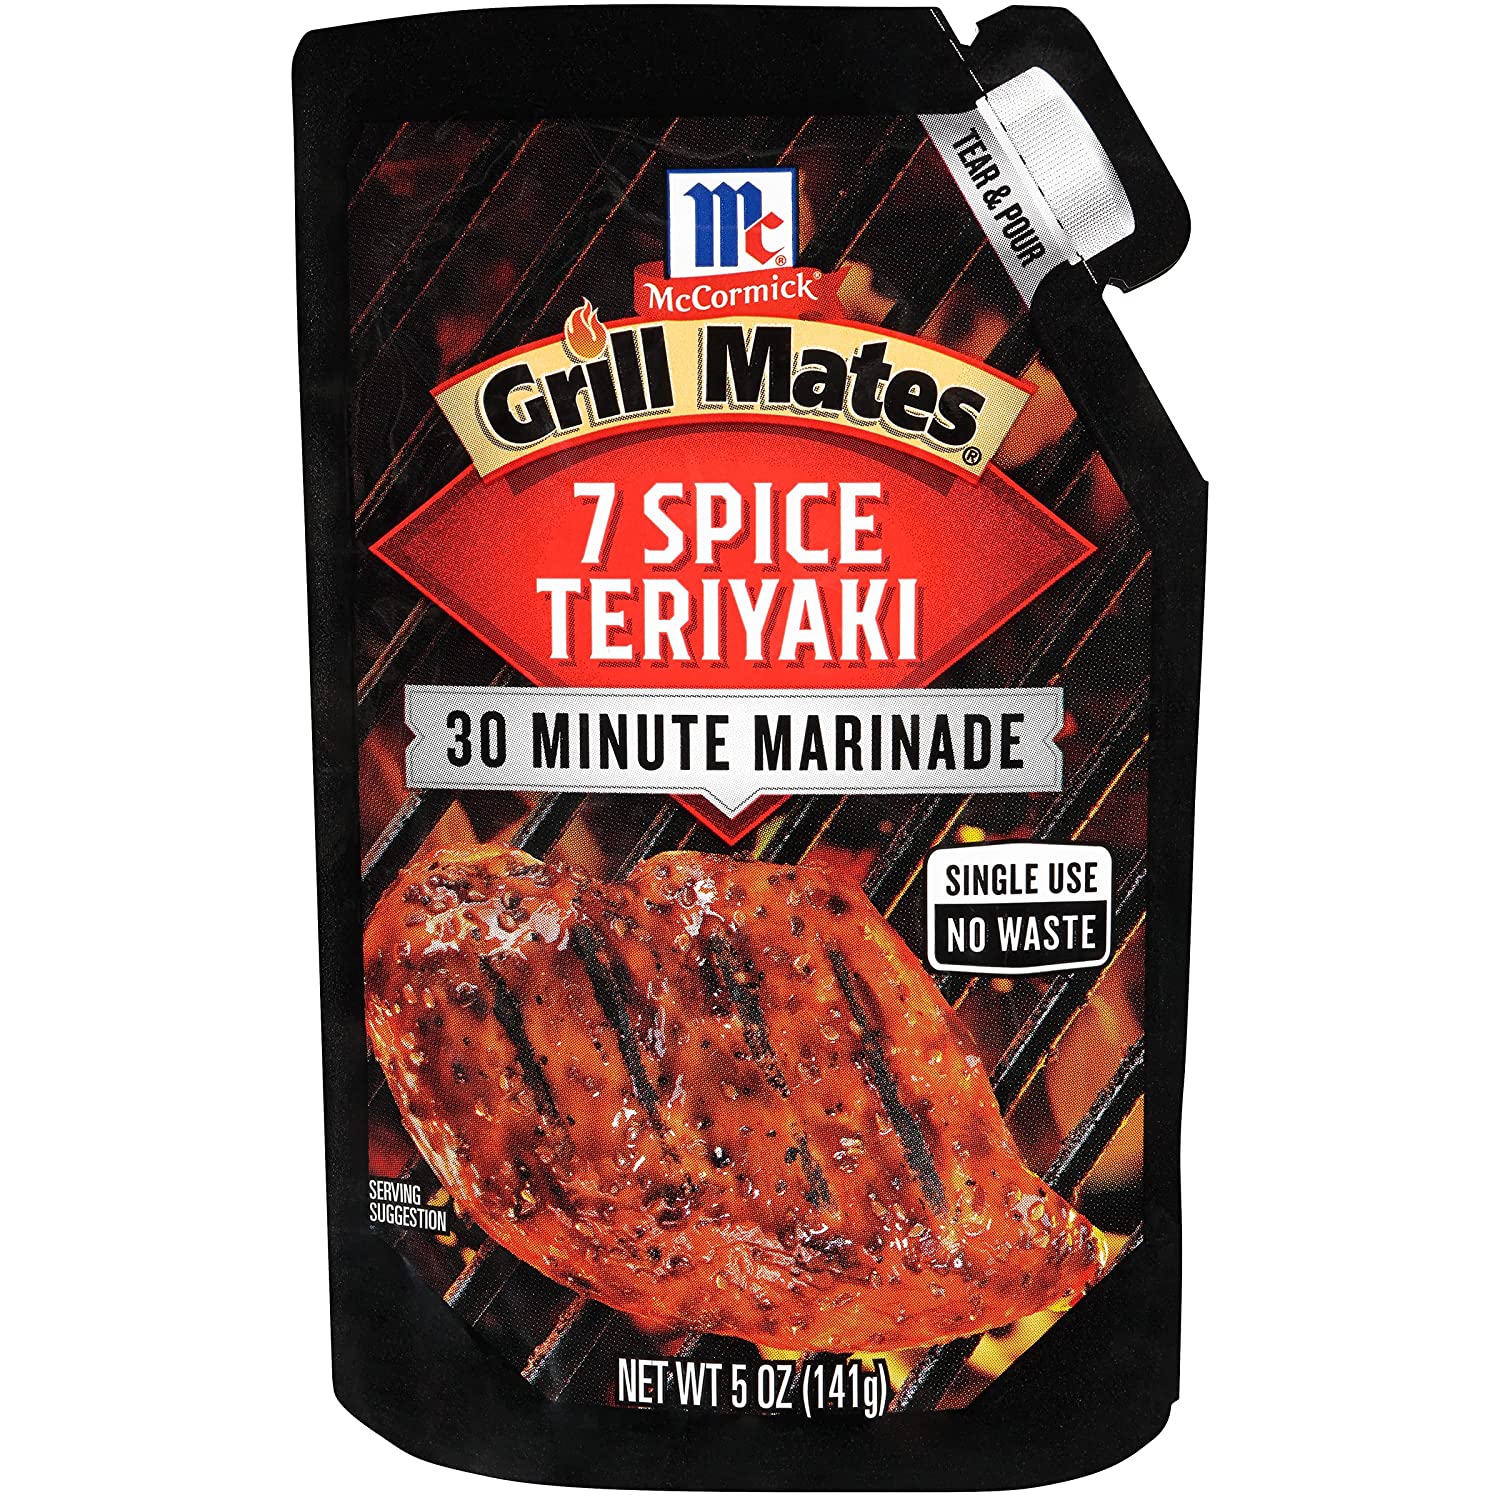 Amazon: McCormick Grill Mates 7 Spice Teriyaki 30 Minute Marinade, 5 oz (Pack of 6) Lowest Ever Price w/5% SS or less w/15% SS Free Shipping $8.84